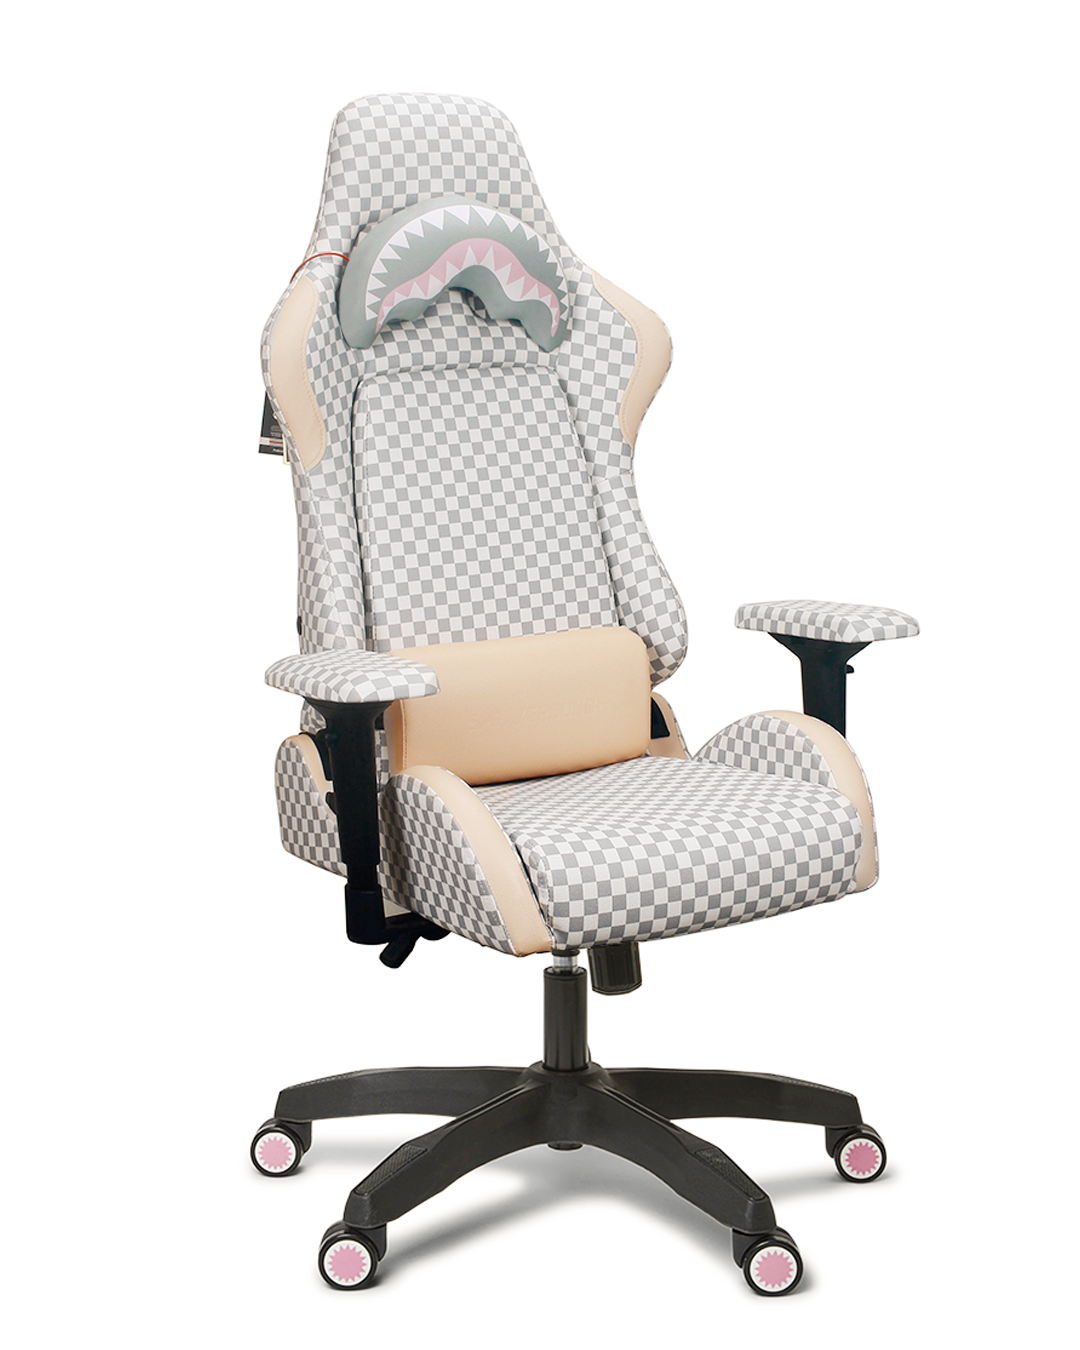 SPRAYGROUND® GAMING CHAIR AIR TO THE THRONE JETSET GAMING CHAIR - SUPER RARE